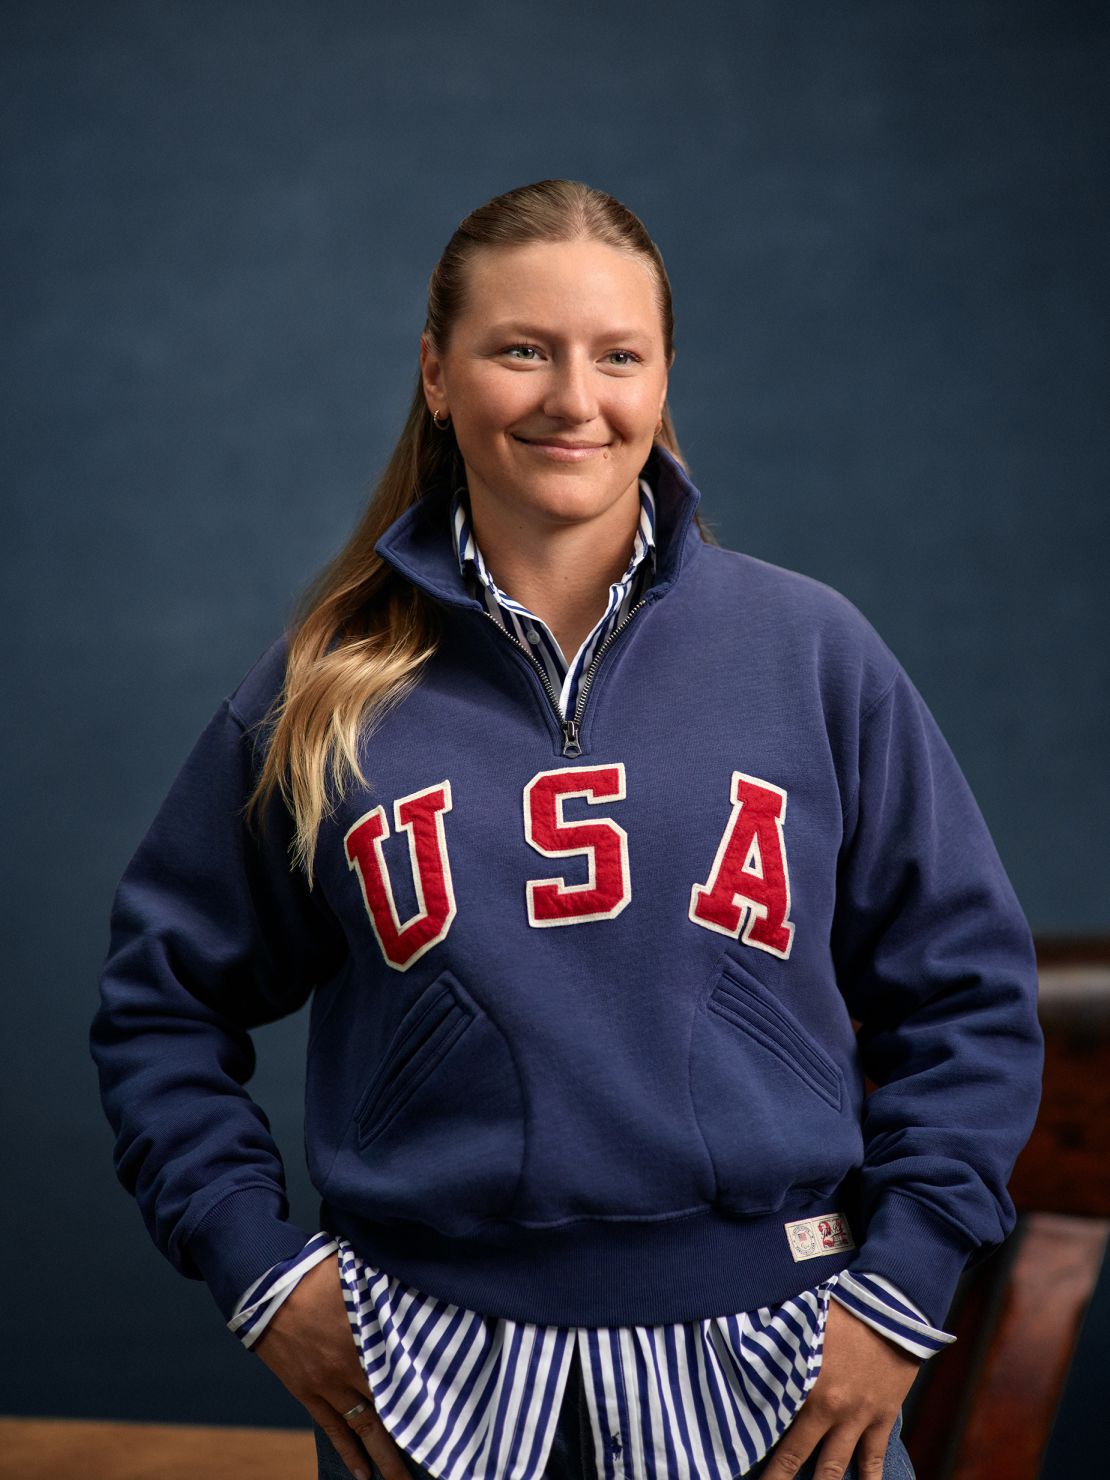 Kiteboarder Daniela Moroz, making her Team USA debut at the Paris Games (as is her sport, in fact).